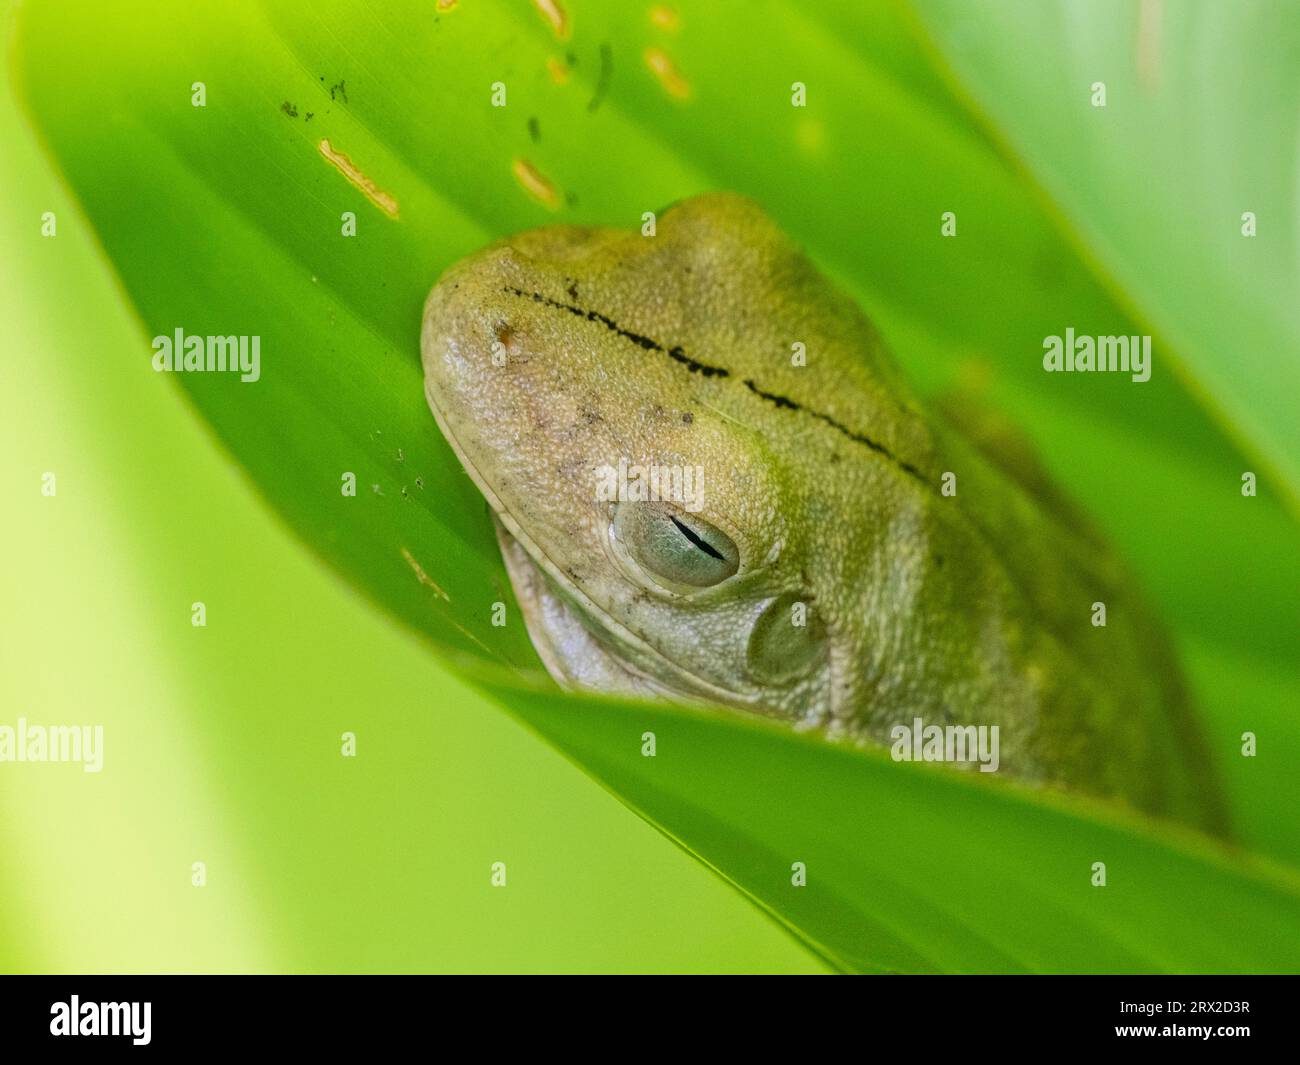 An adult Rosenberg's gladiator treefrog (Hypsiboas rosenbergi) in a leaf during the day, Rio Seco, Costa Rica, Central America Stock Photo